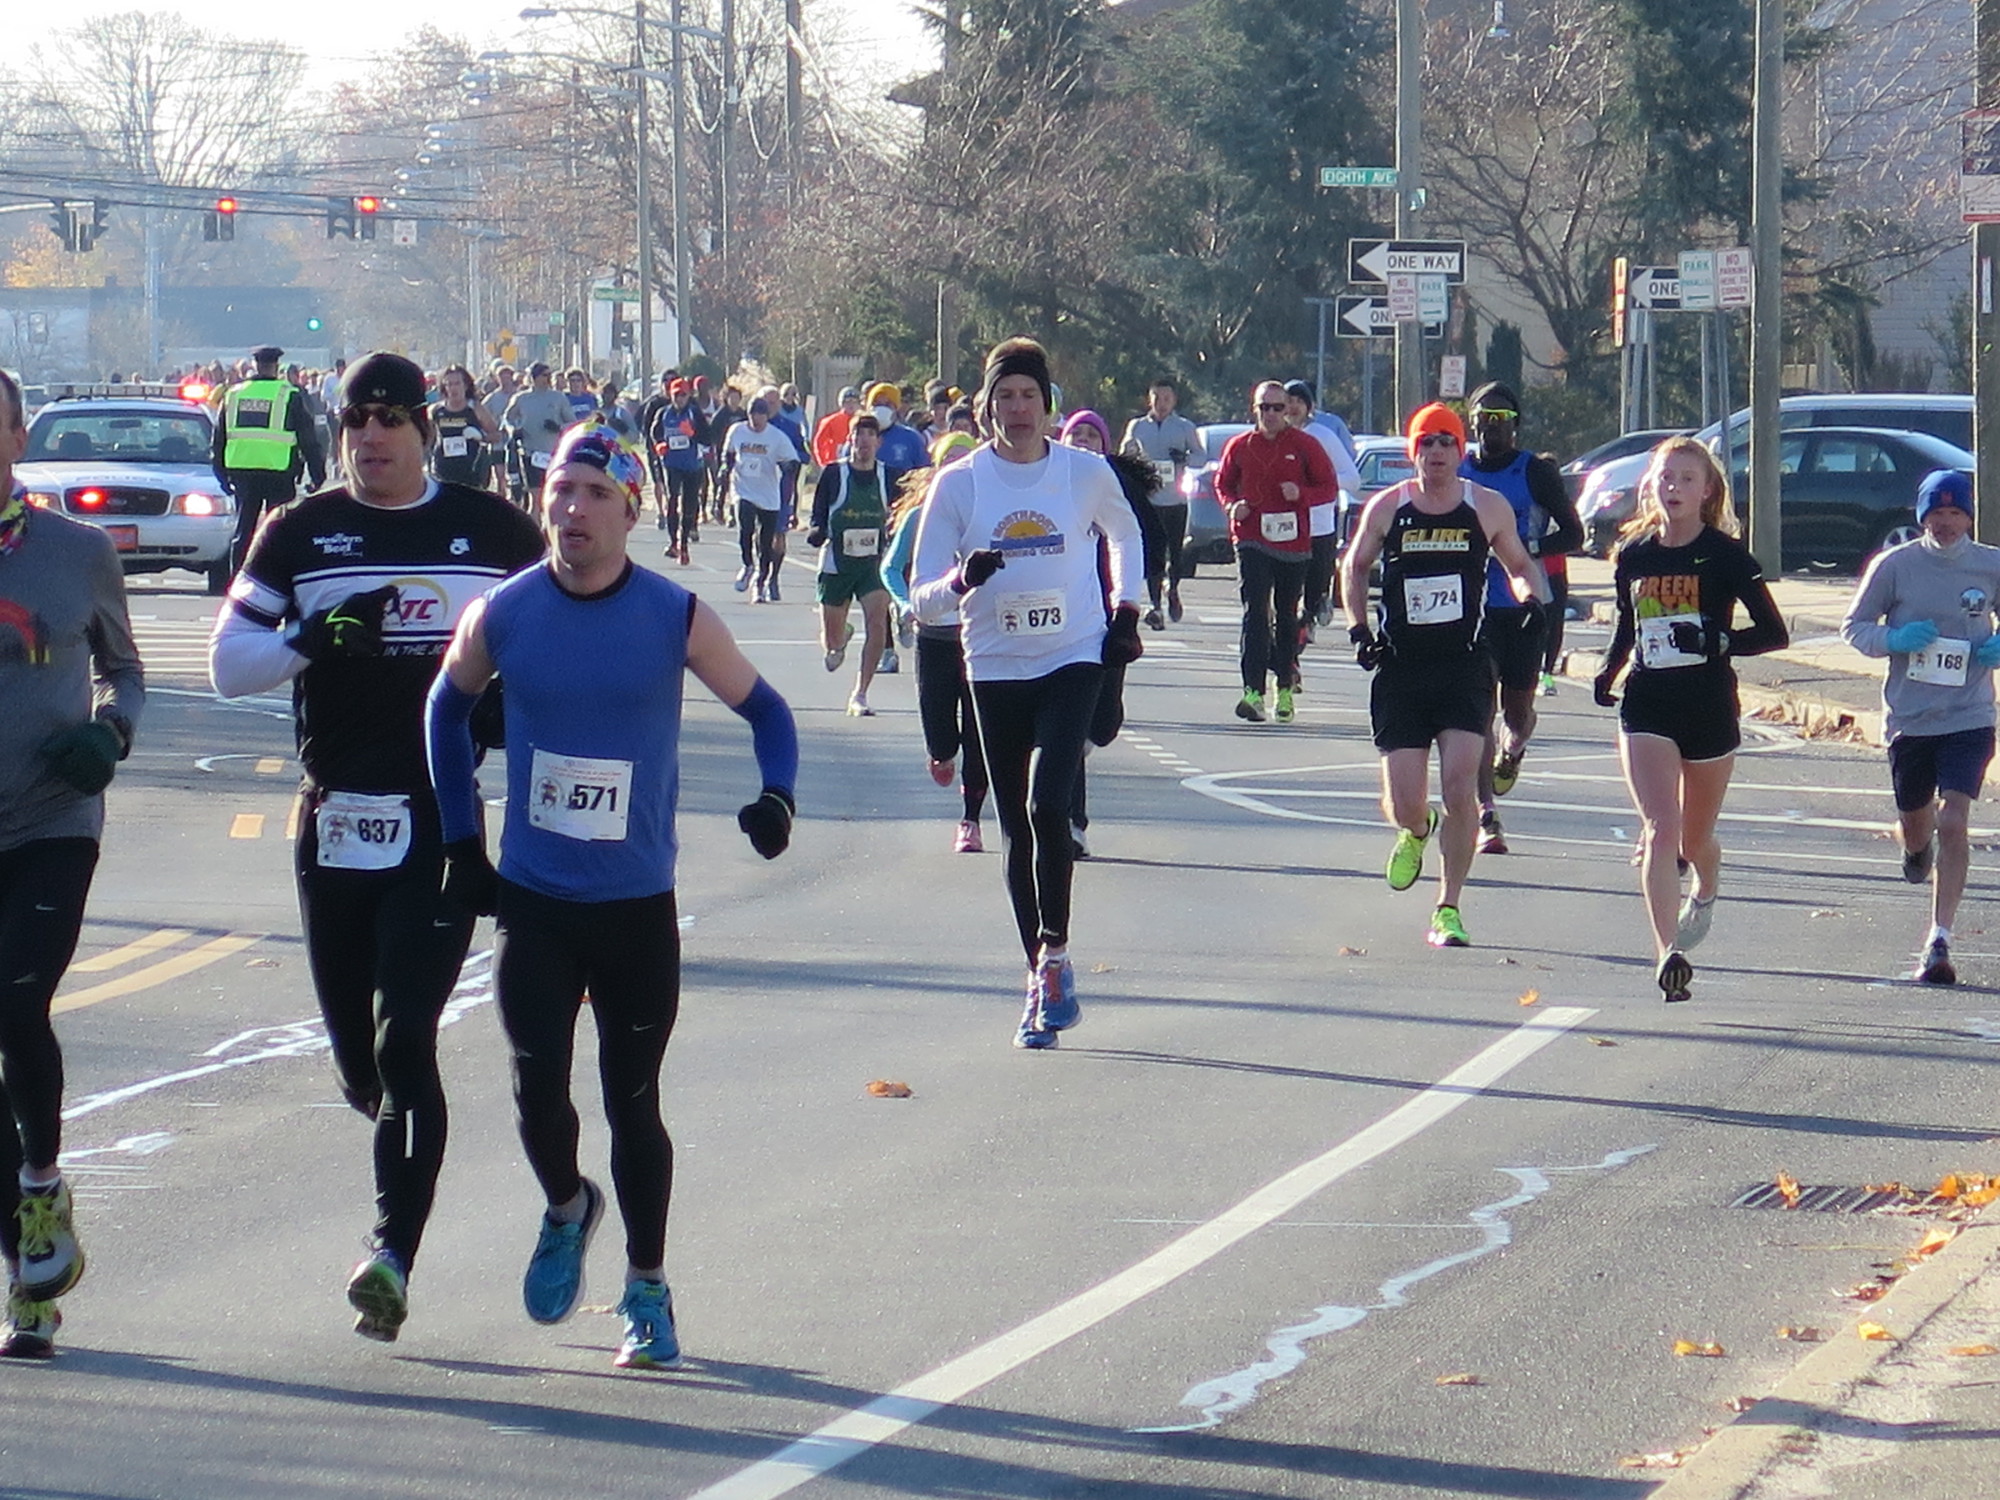 More than 600 runners raced down Newbridge Road last Saturday for the Greater Long Island Running Club’s 7th annual Blazing Trails 4-Autism four-mile run and walk.